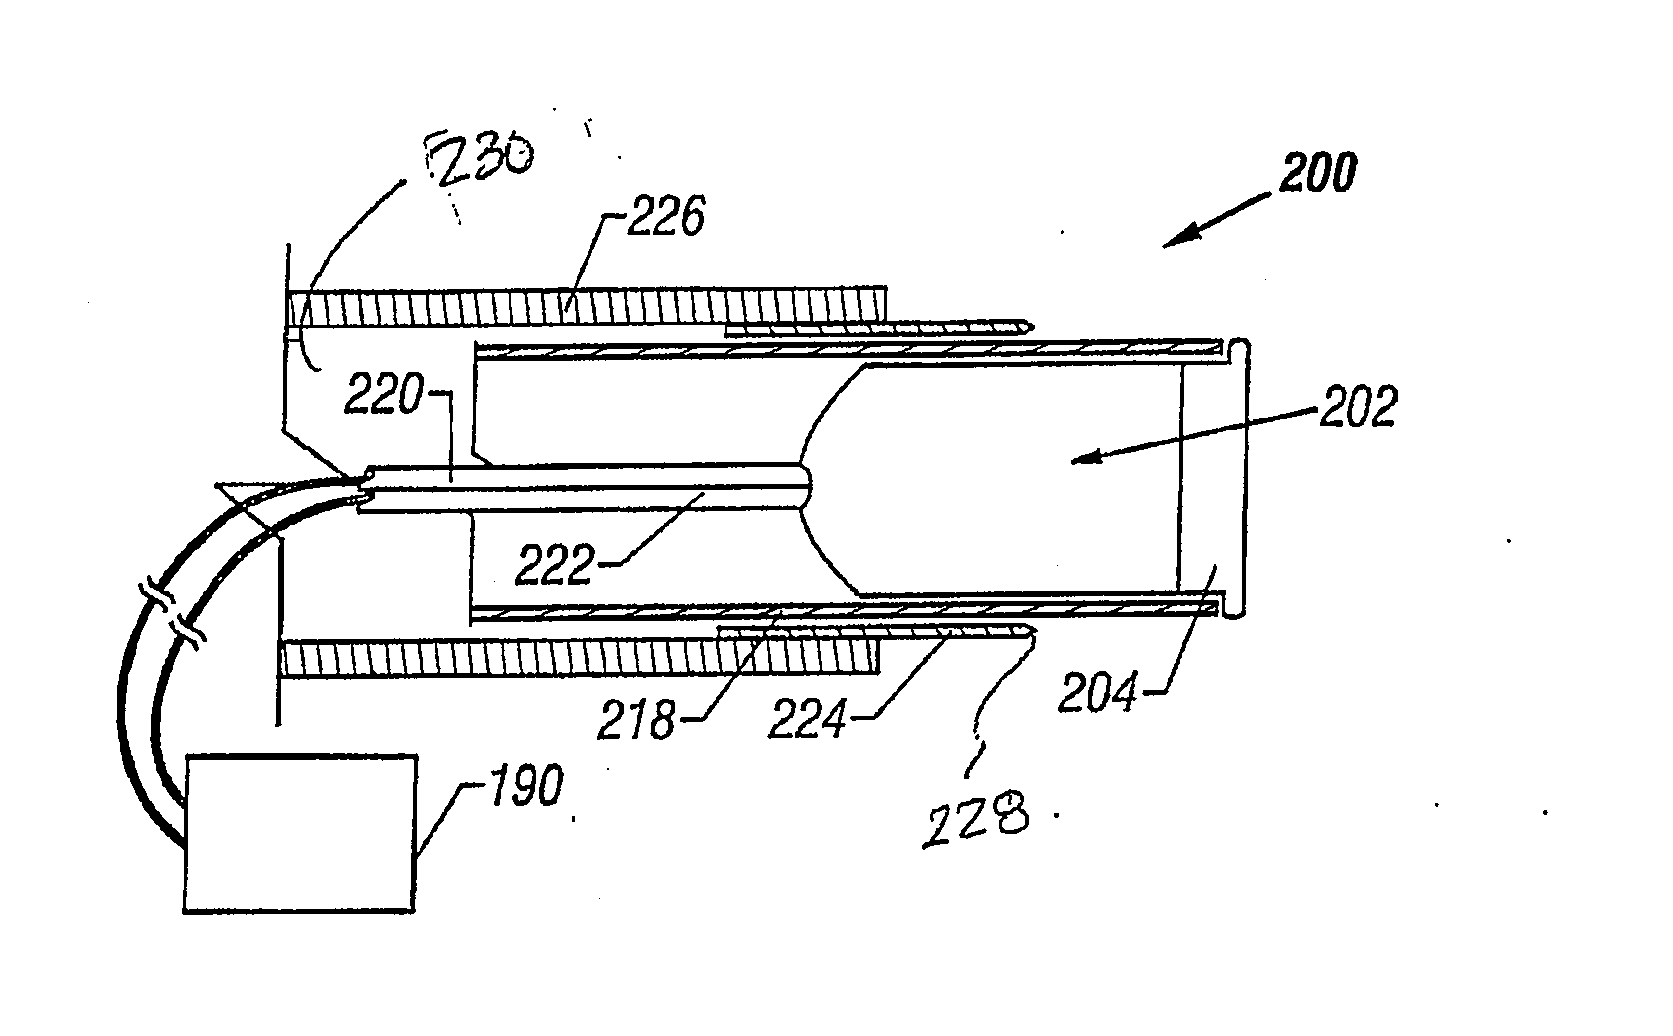 Devices for creating passages and sensing for blood vessels